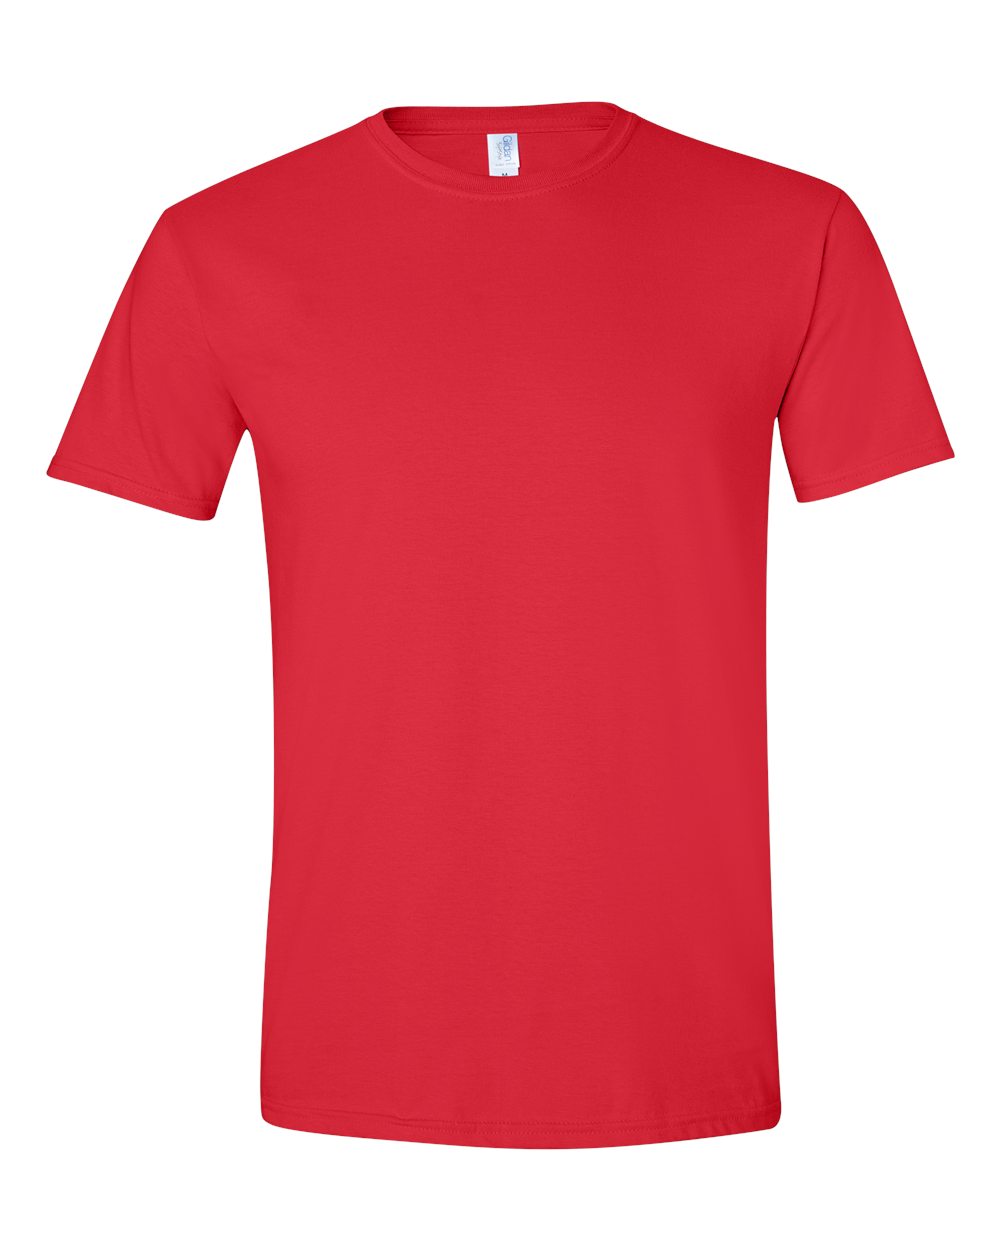 Pretreated Gildan 64000 Softstyle T-Shirt - Red